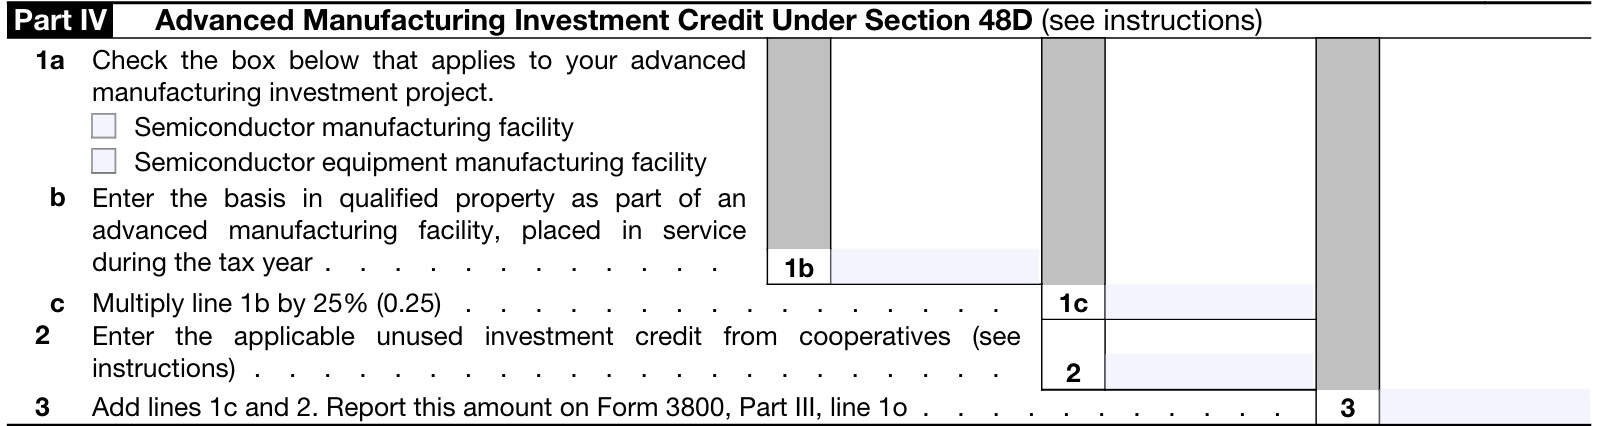 IRS Form 3468, Part IV: advanced manufacturing investment credit under Section 48D